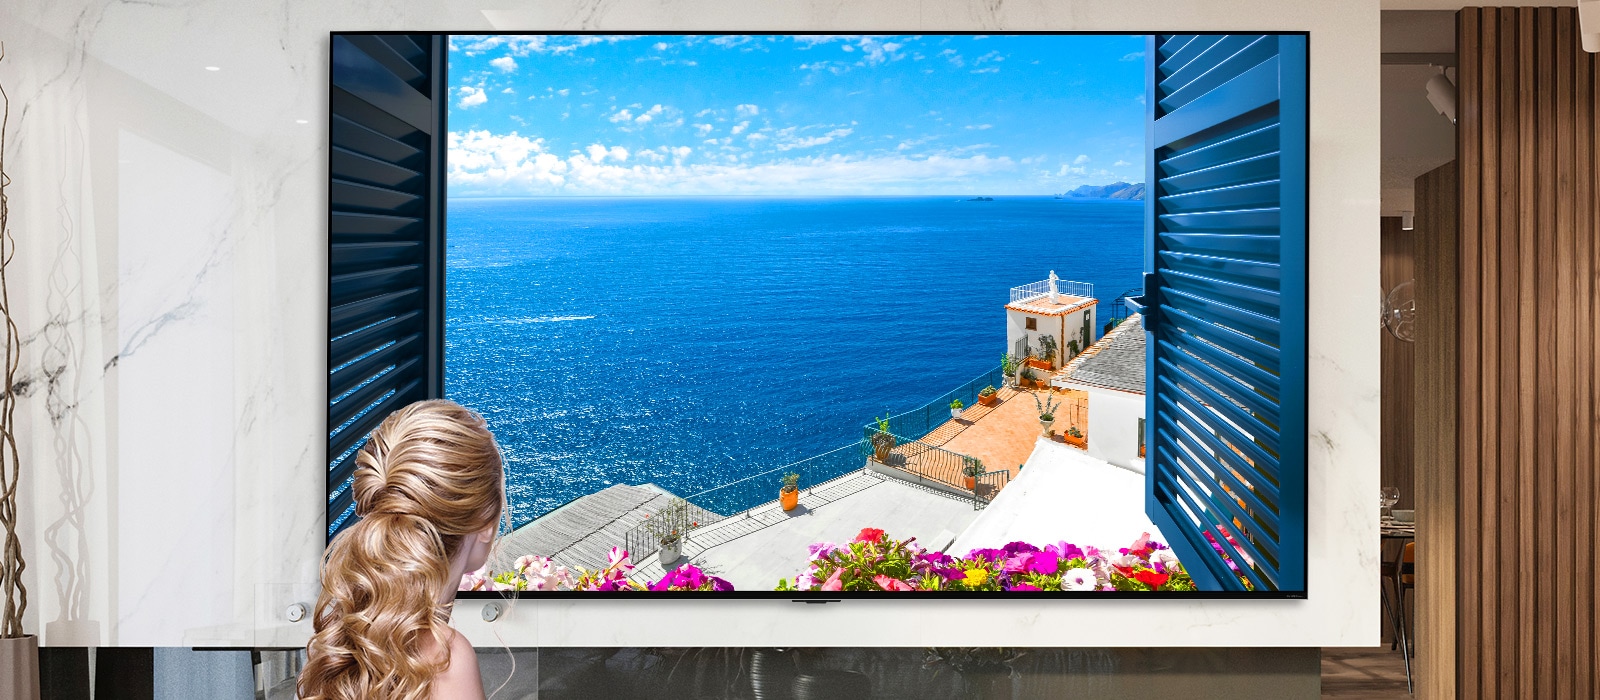 Rear view of a woman looking out of a window at a blue sea and white buildings. As the page scrolls down the image zooms out to show more of the room and reveal the window to be an LG QNED MiniLED TV.